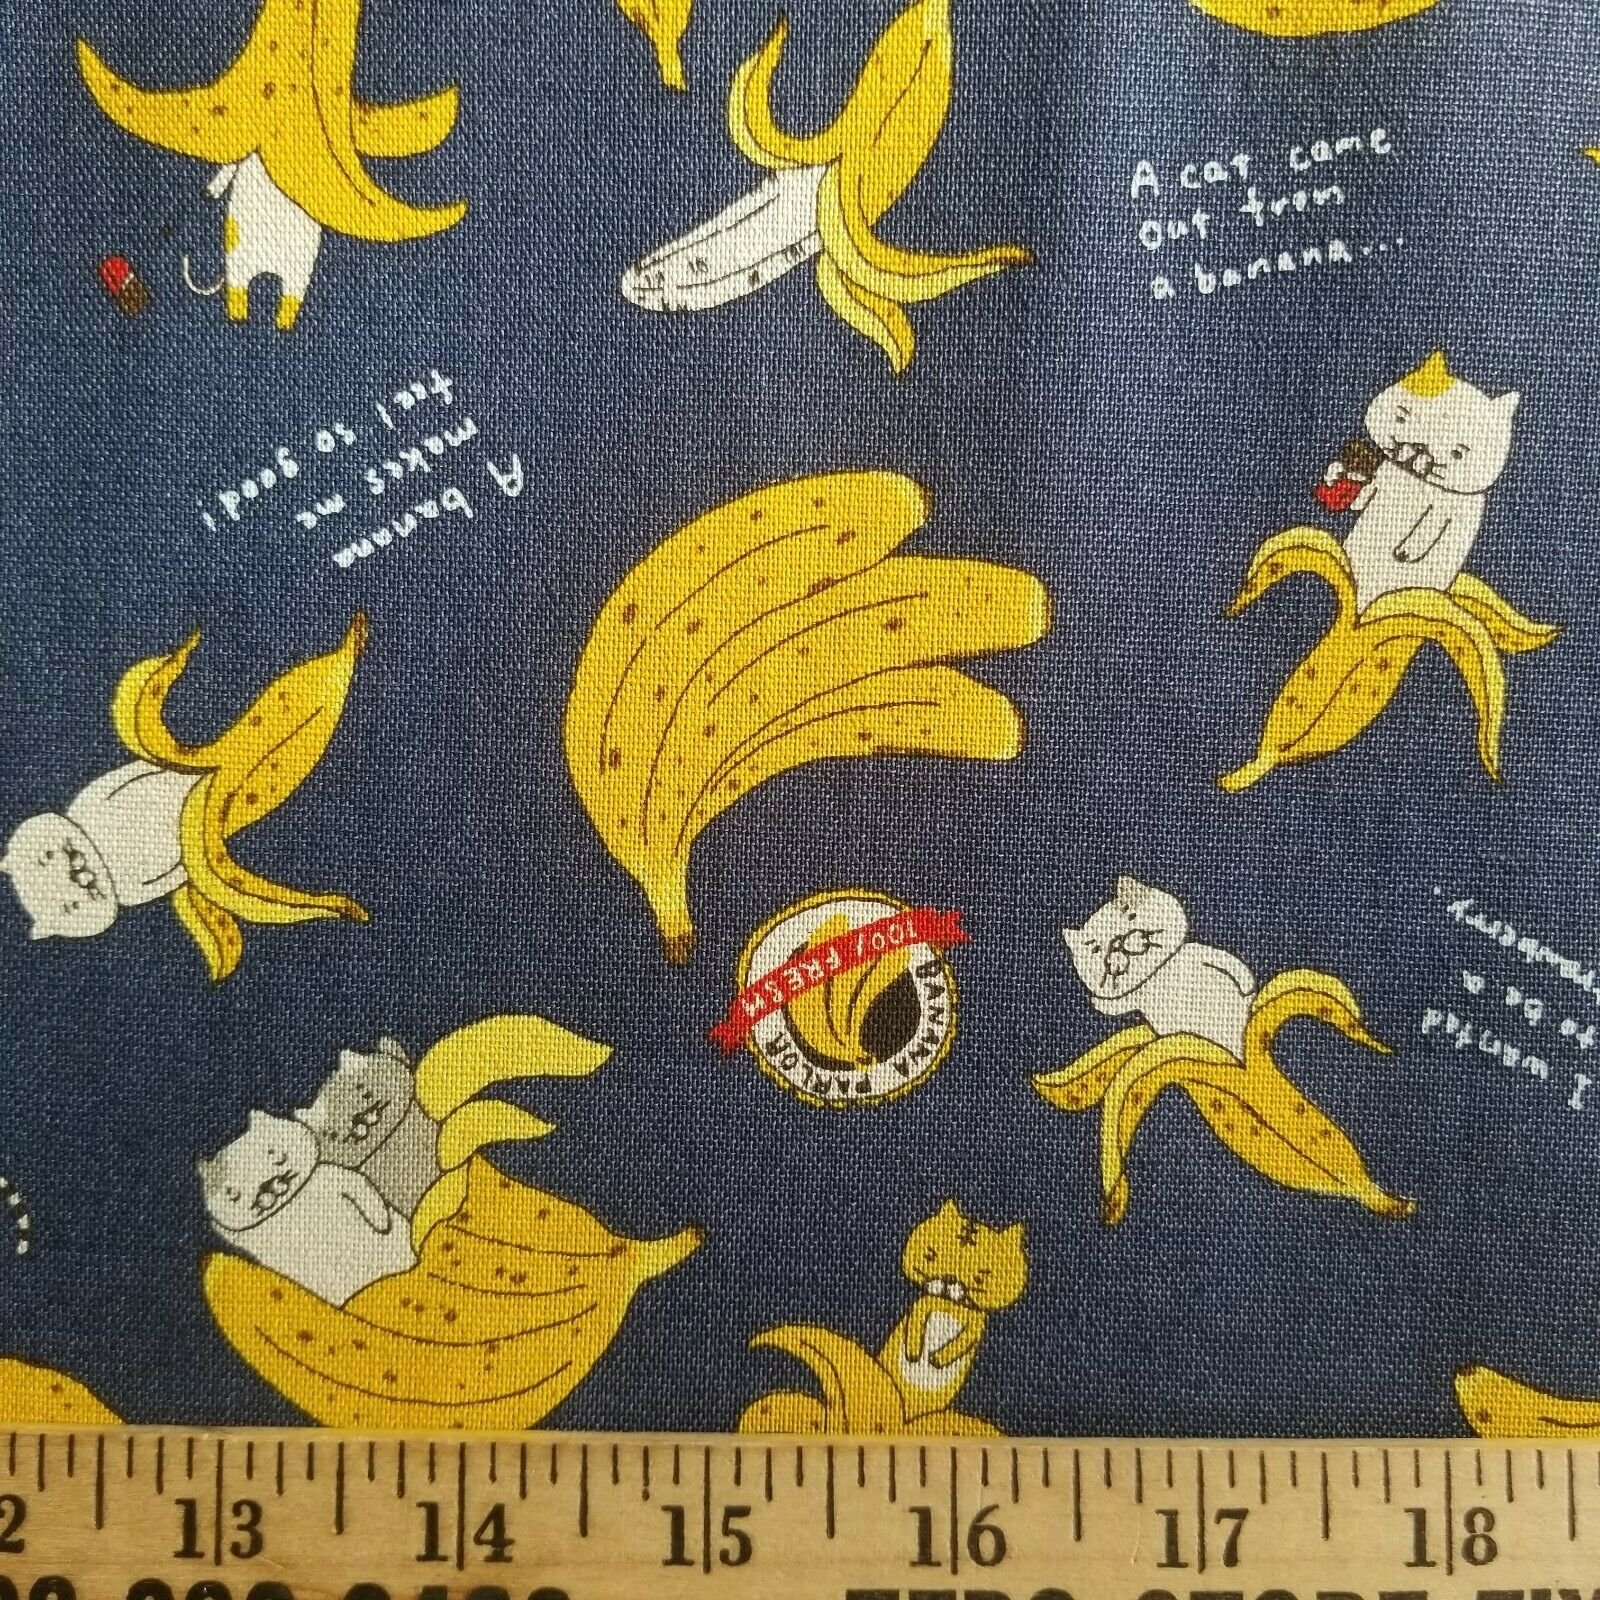 Light cotton fabric by the yard, Japaese fabric, Ise cotton